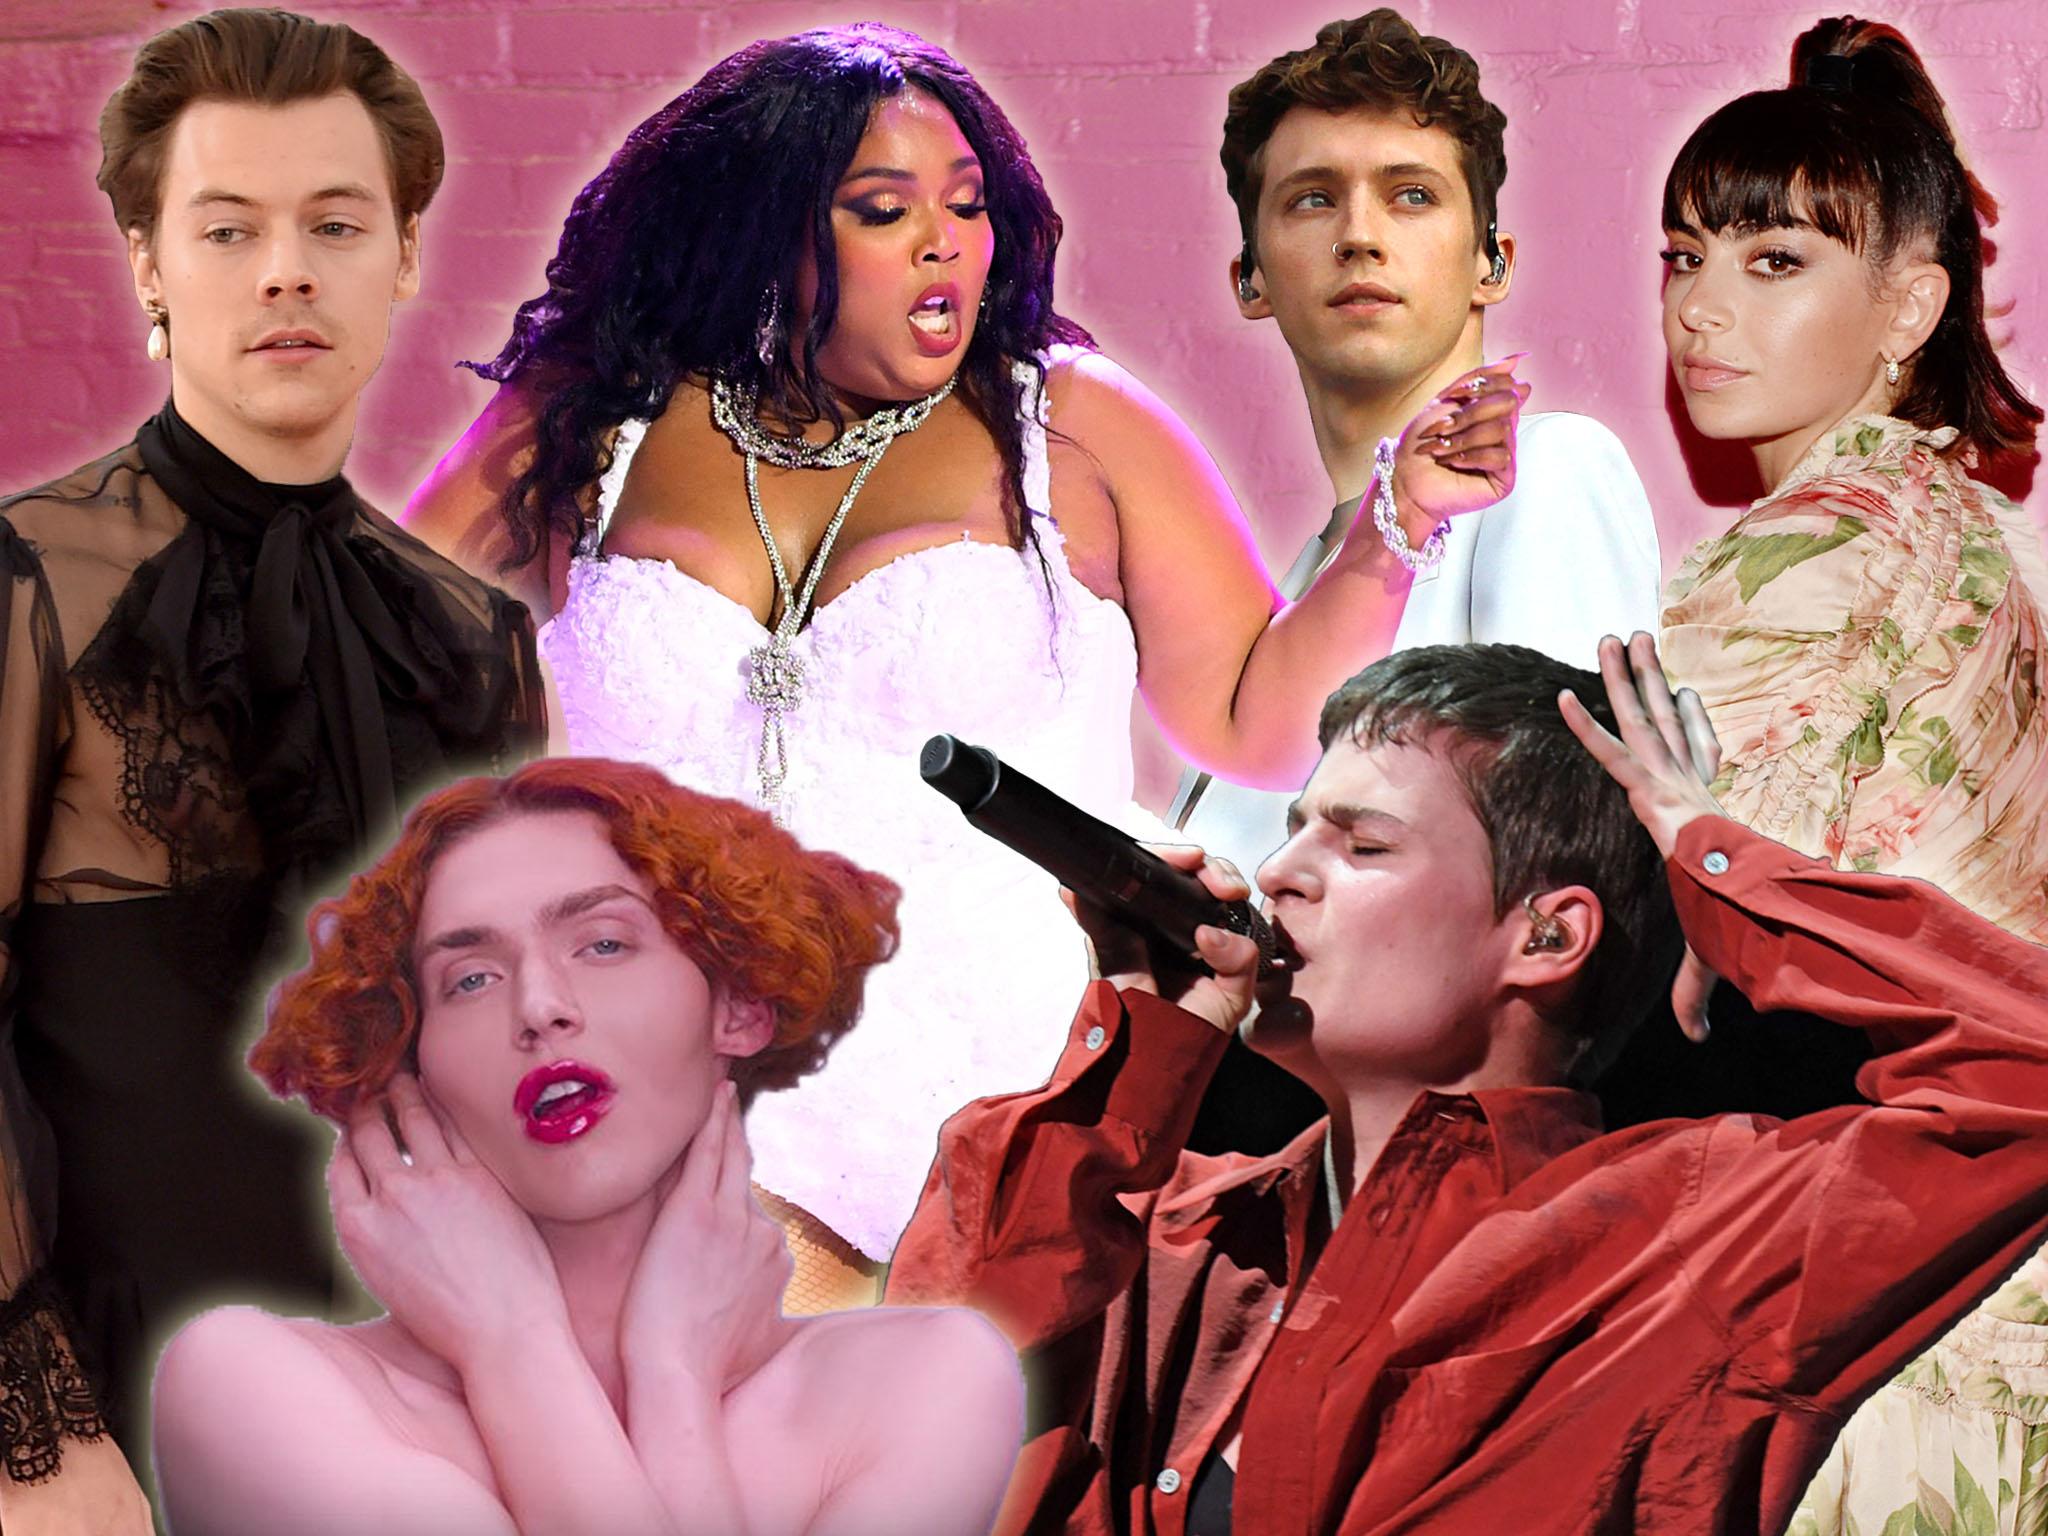 Let's talk about sex, baby: How pop music is changing the ...